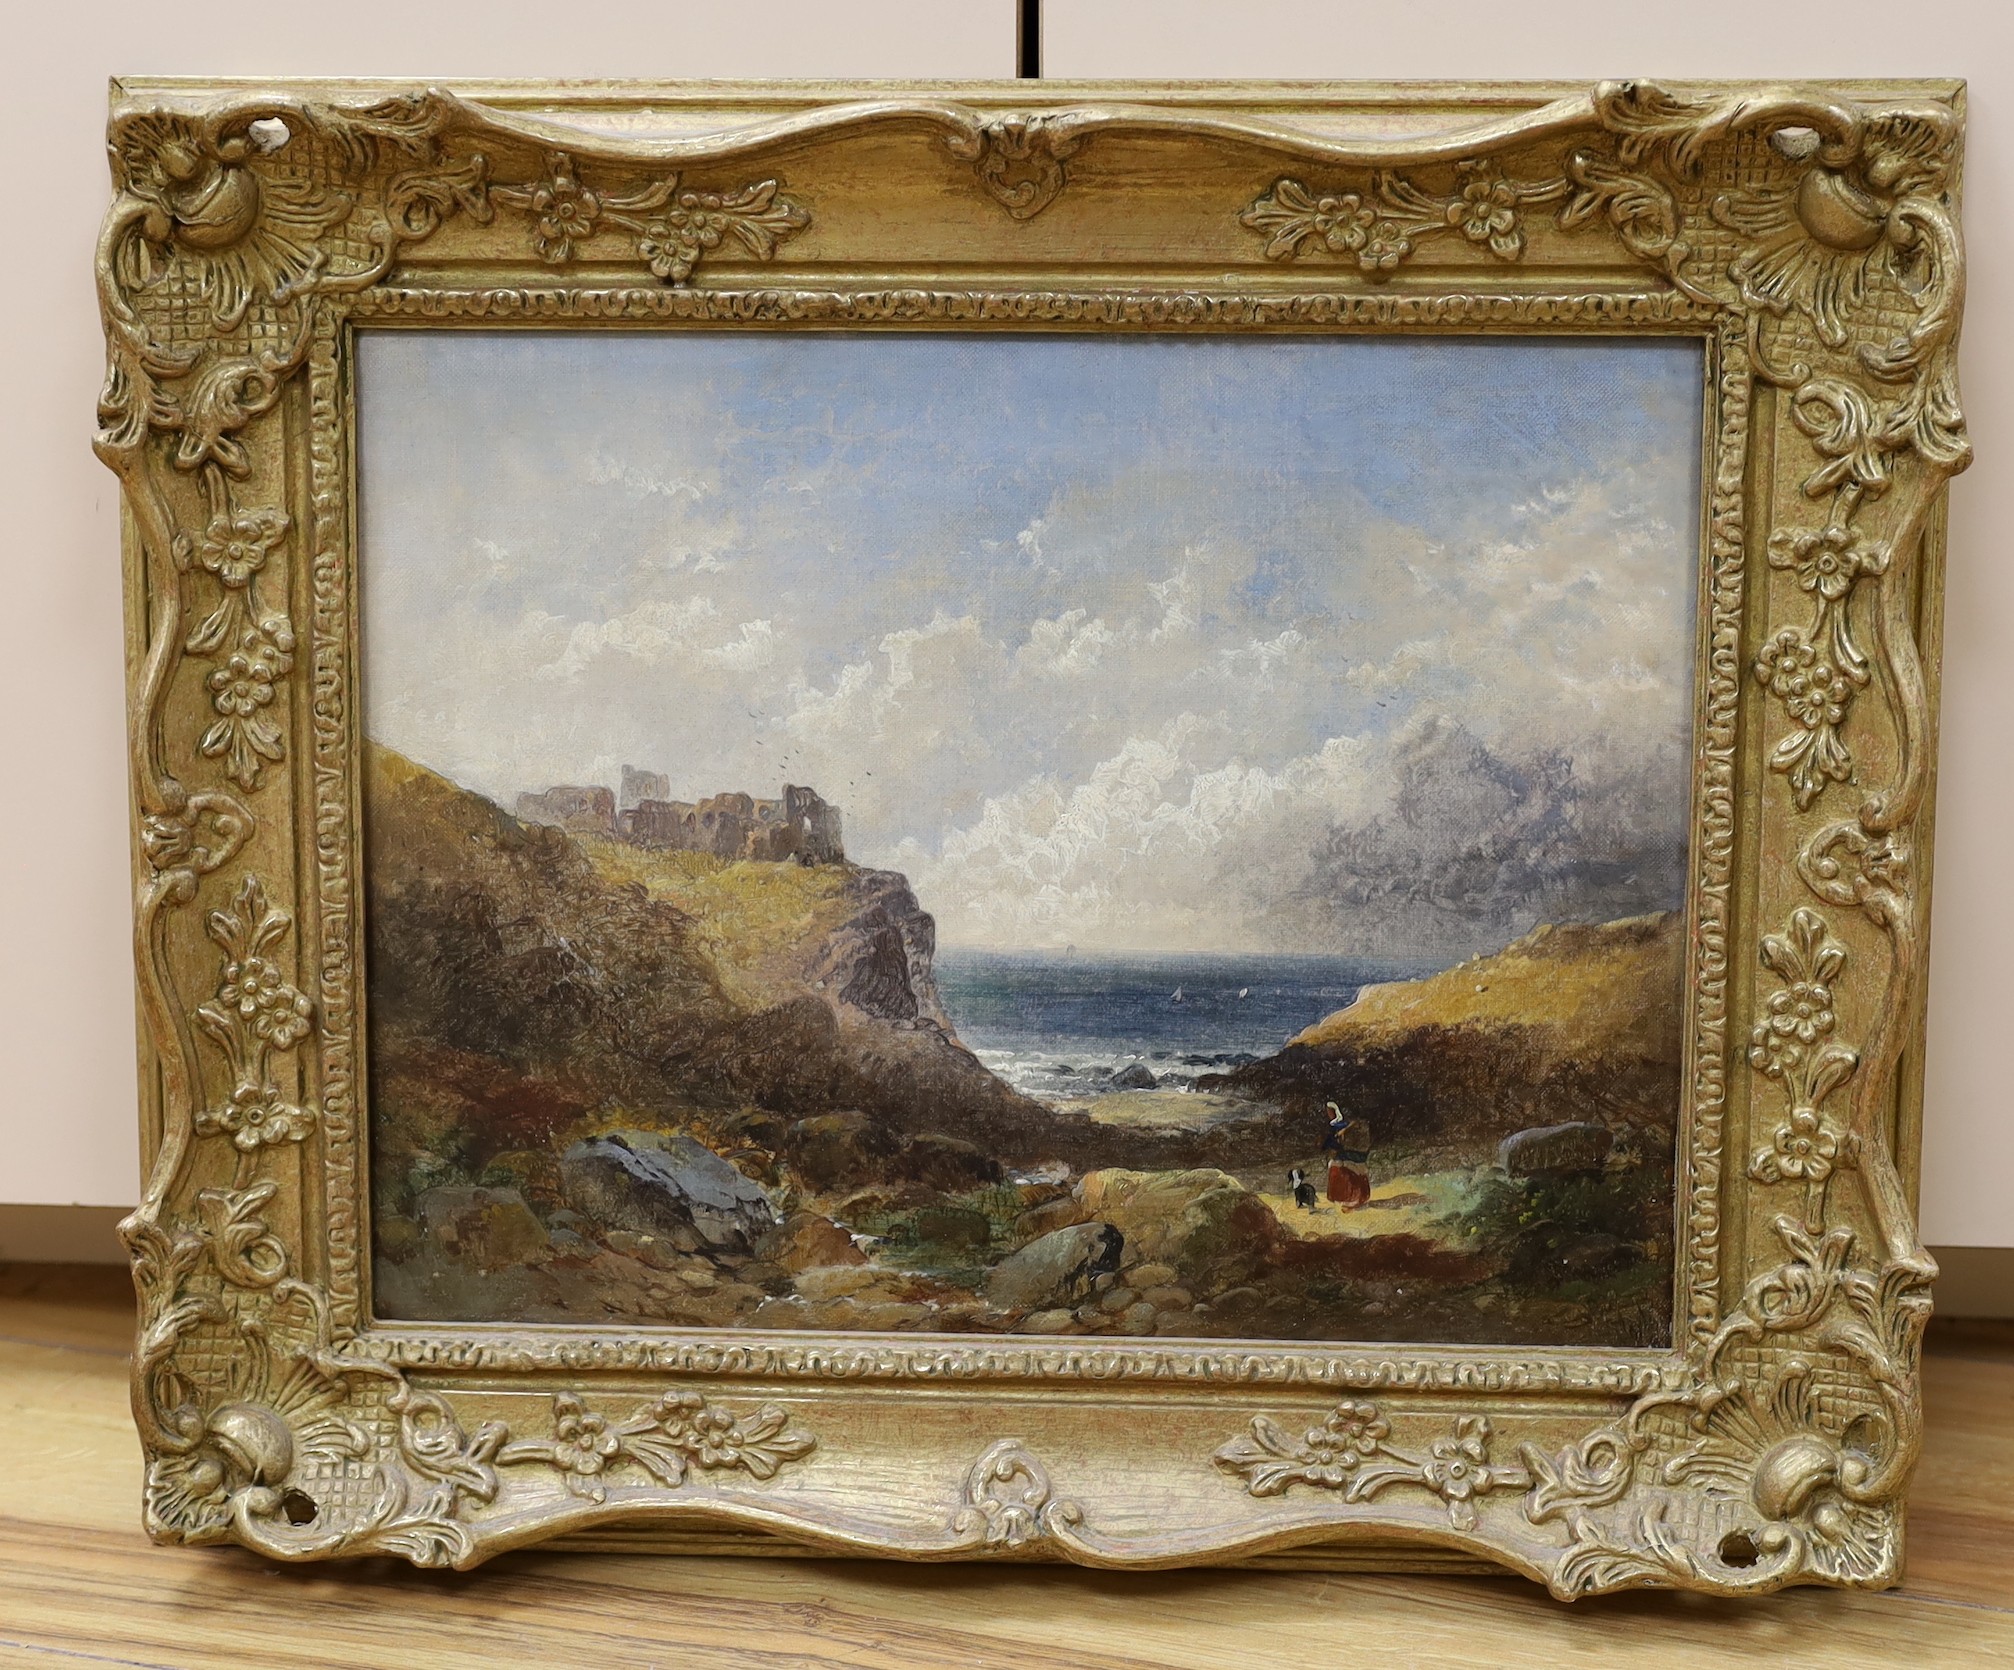 19th century English School, oil on canvas, Coastal landscape with woman, dog and castle ruins, 29 x 38cm